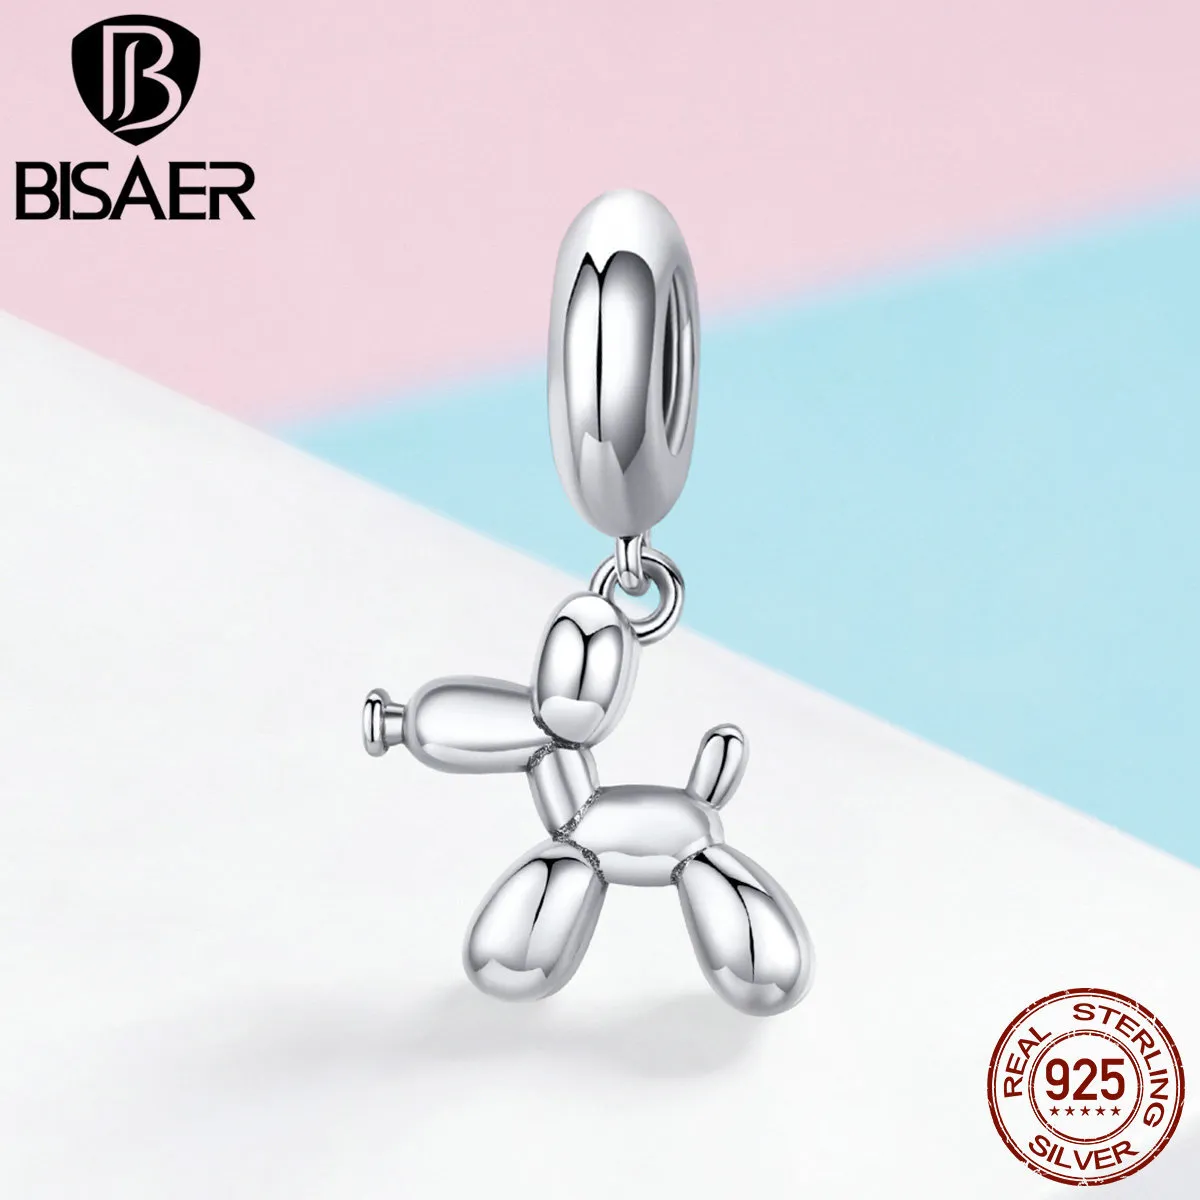 Bisaer 925 Sterling Silver Balloon Dog Tools Charms Puppet Dog Beads Fit Armband Pärlor för silver 925 SMEYCH MAKING ECC981 Q0225212L